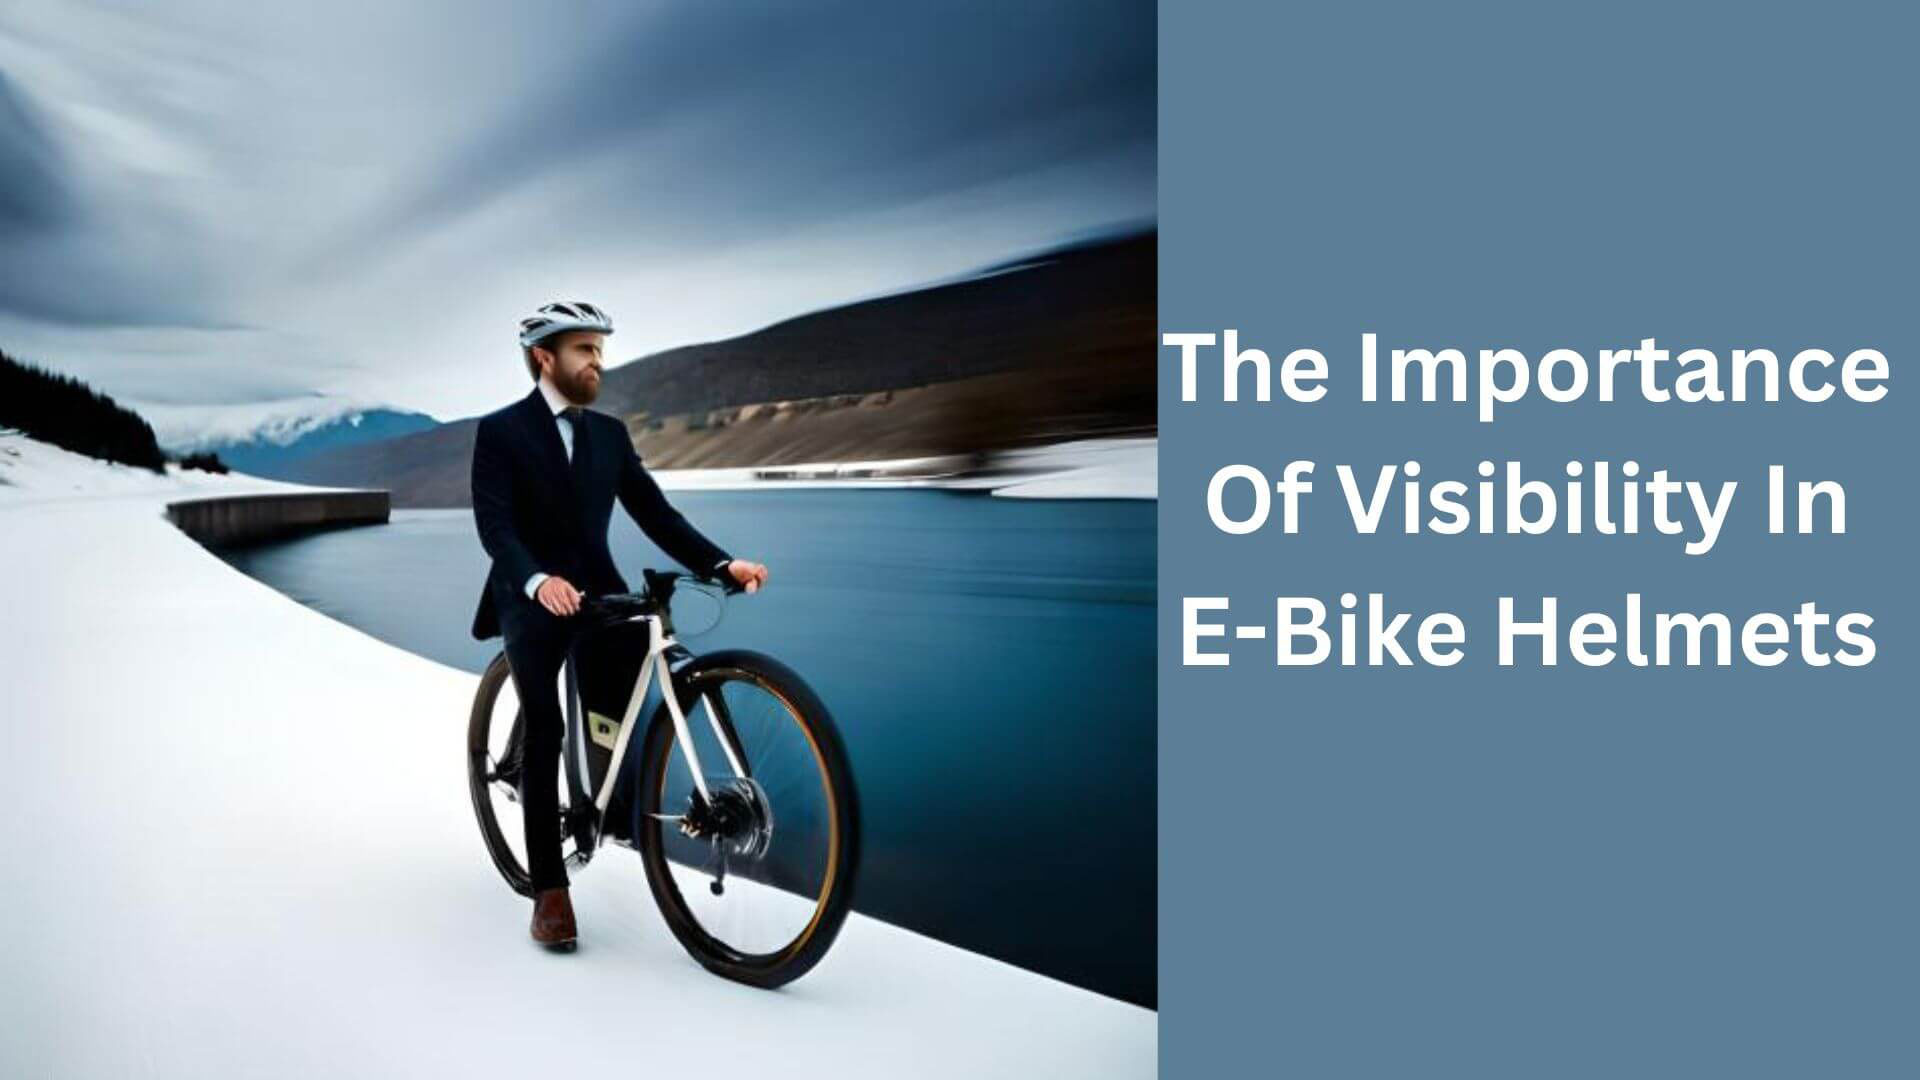 The Importance Of Visibility In E-Bike Helmets